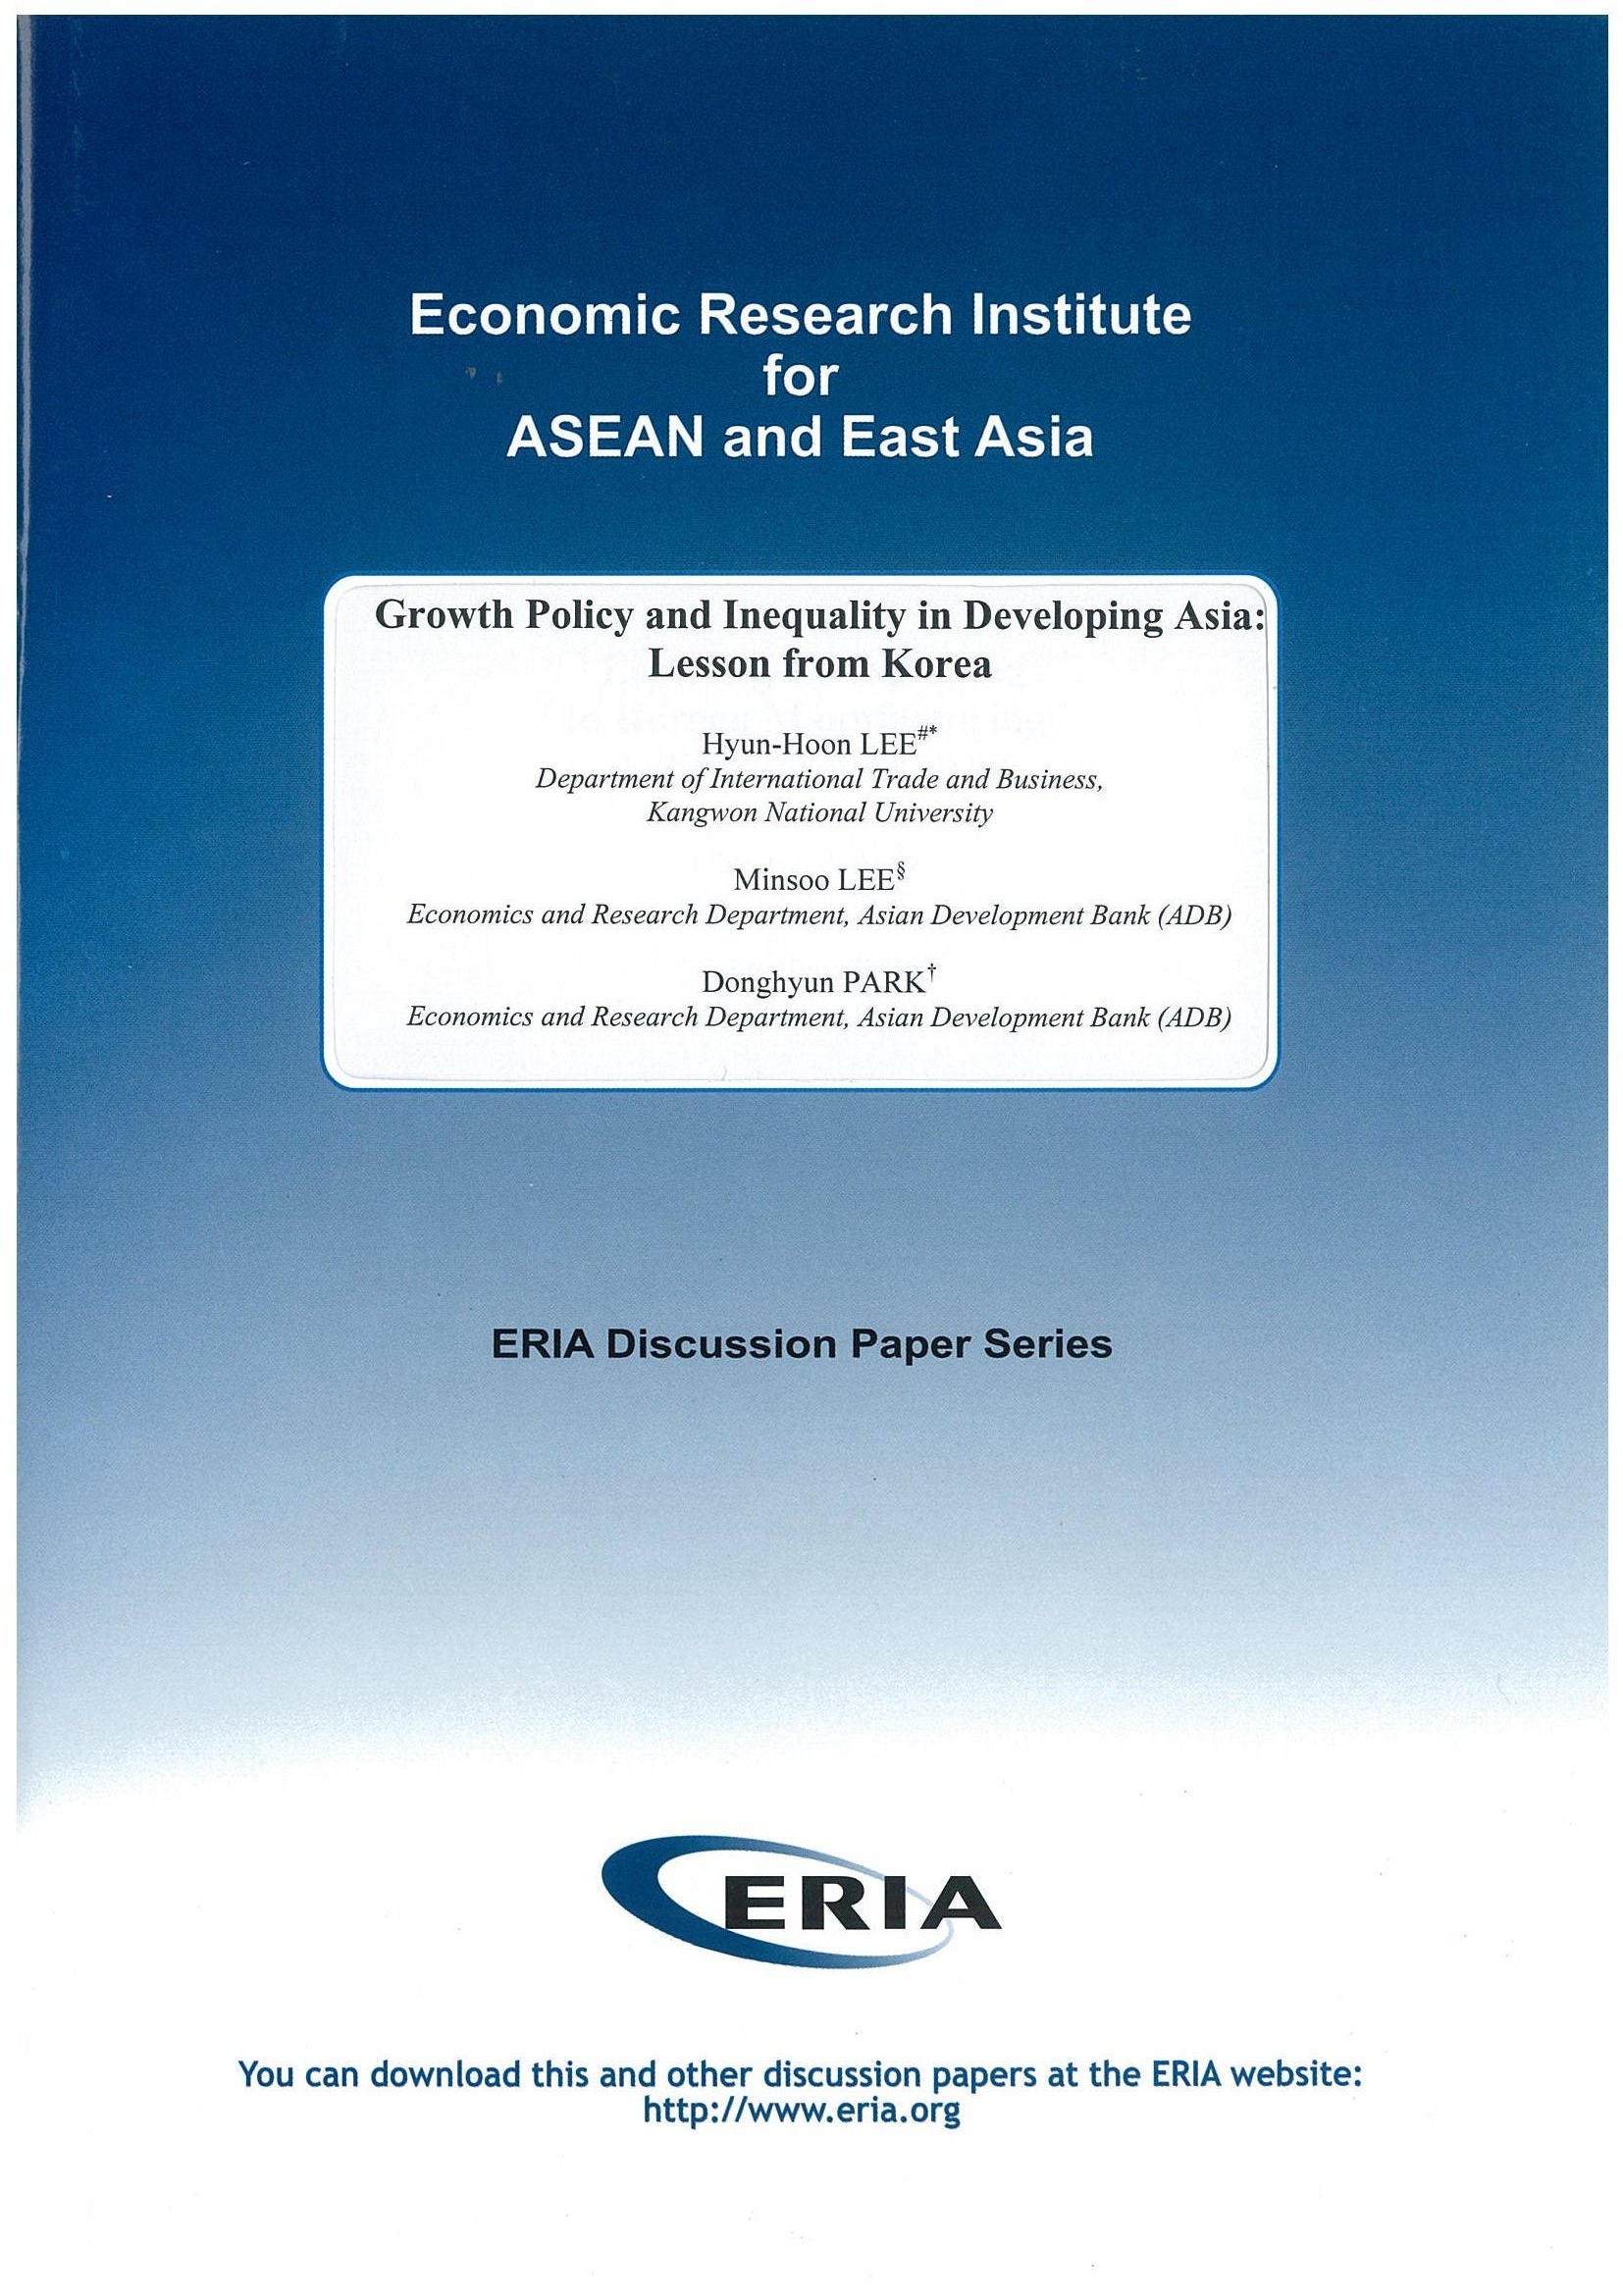 Growth Policy and Inequality in Developing Asia: Lesson from Korea